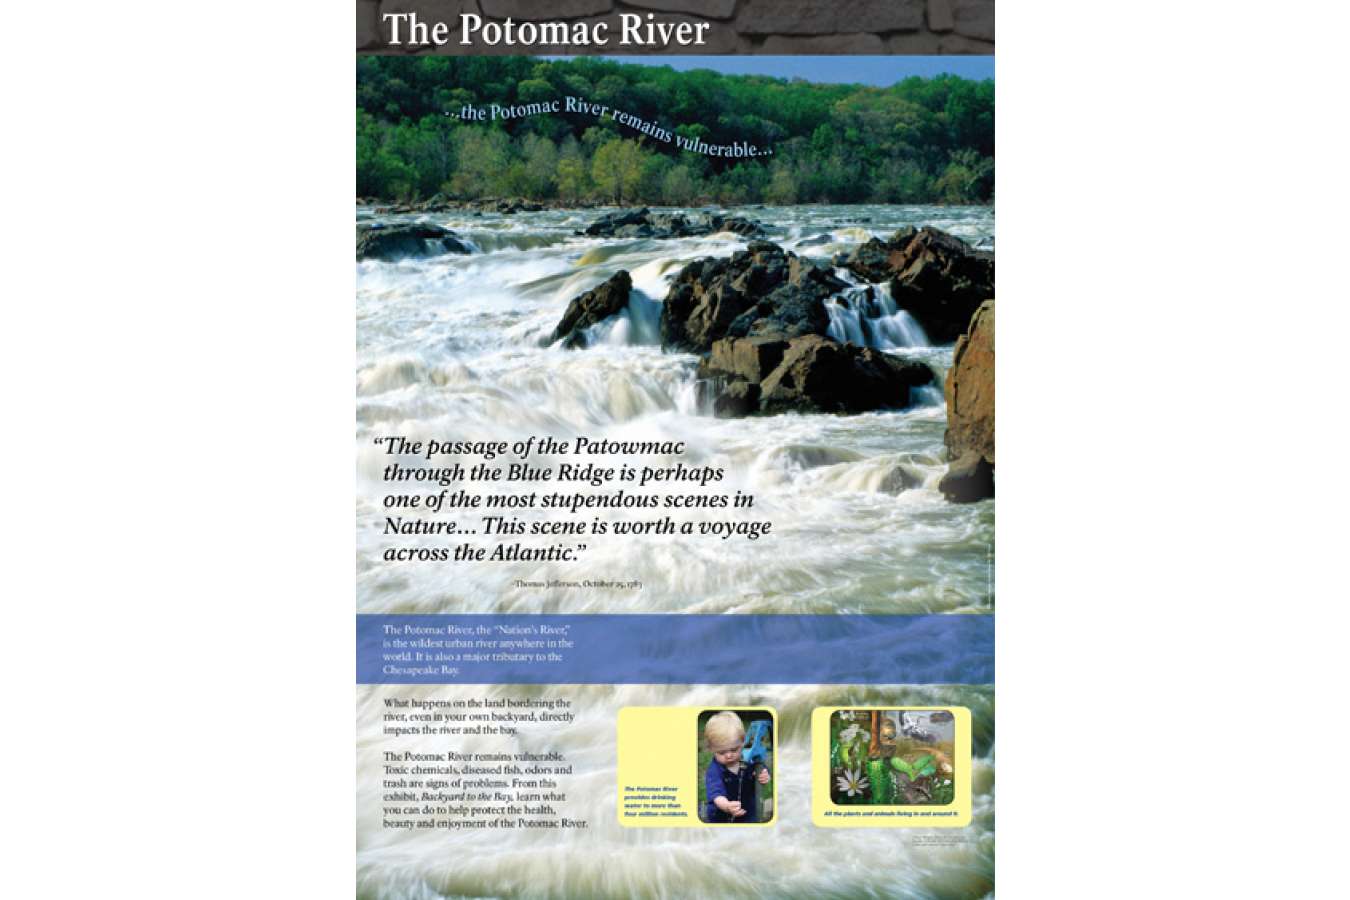 Potcy X1 : The Potomac River is the Wildest Urban River in the World.